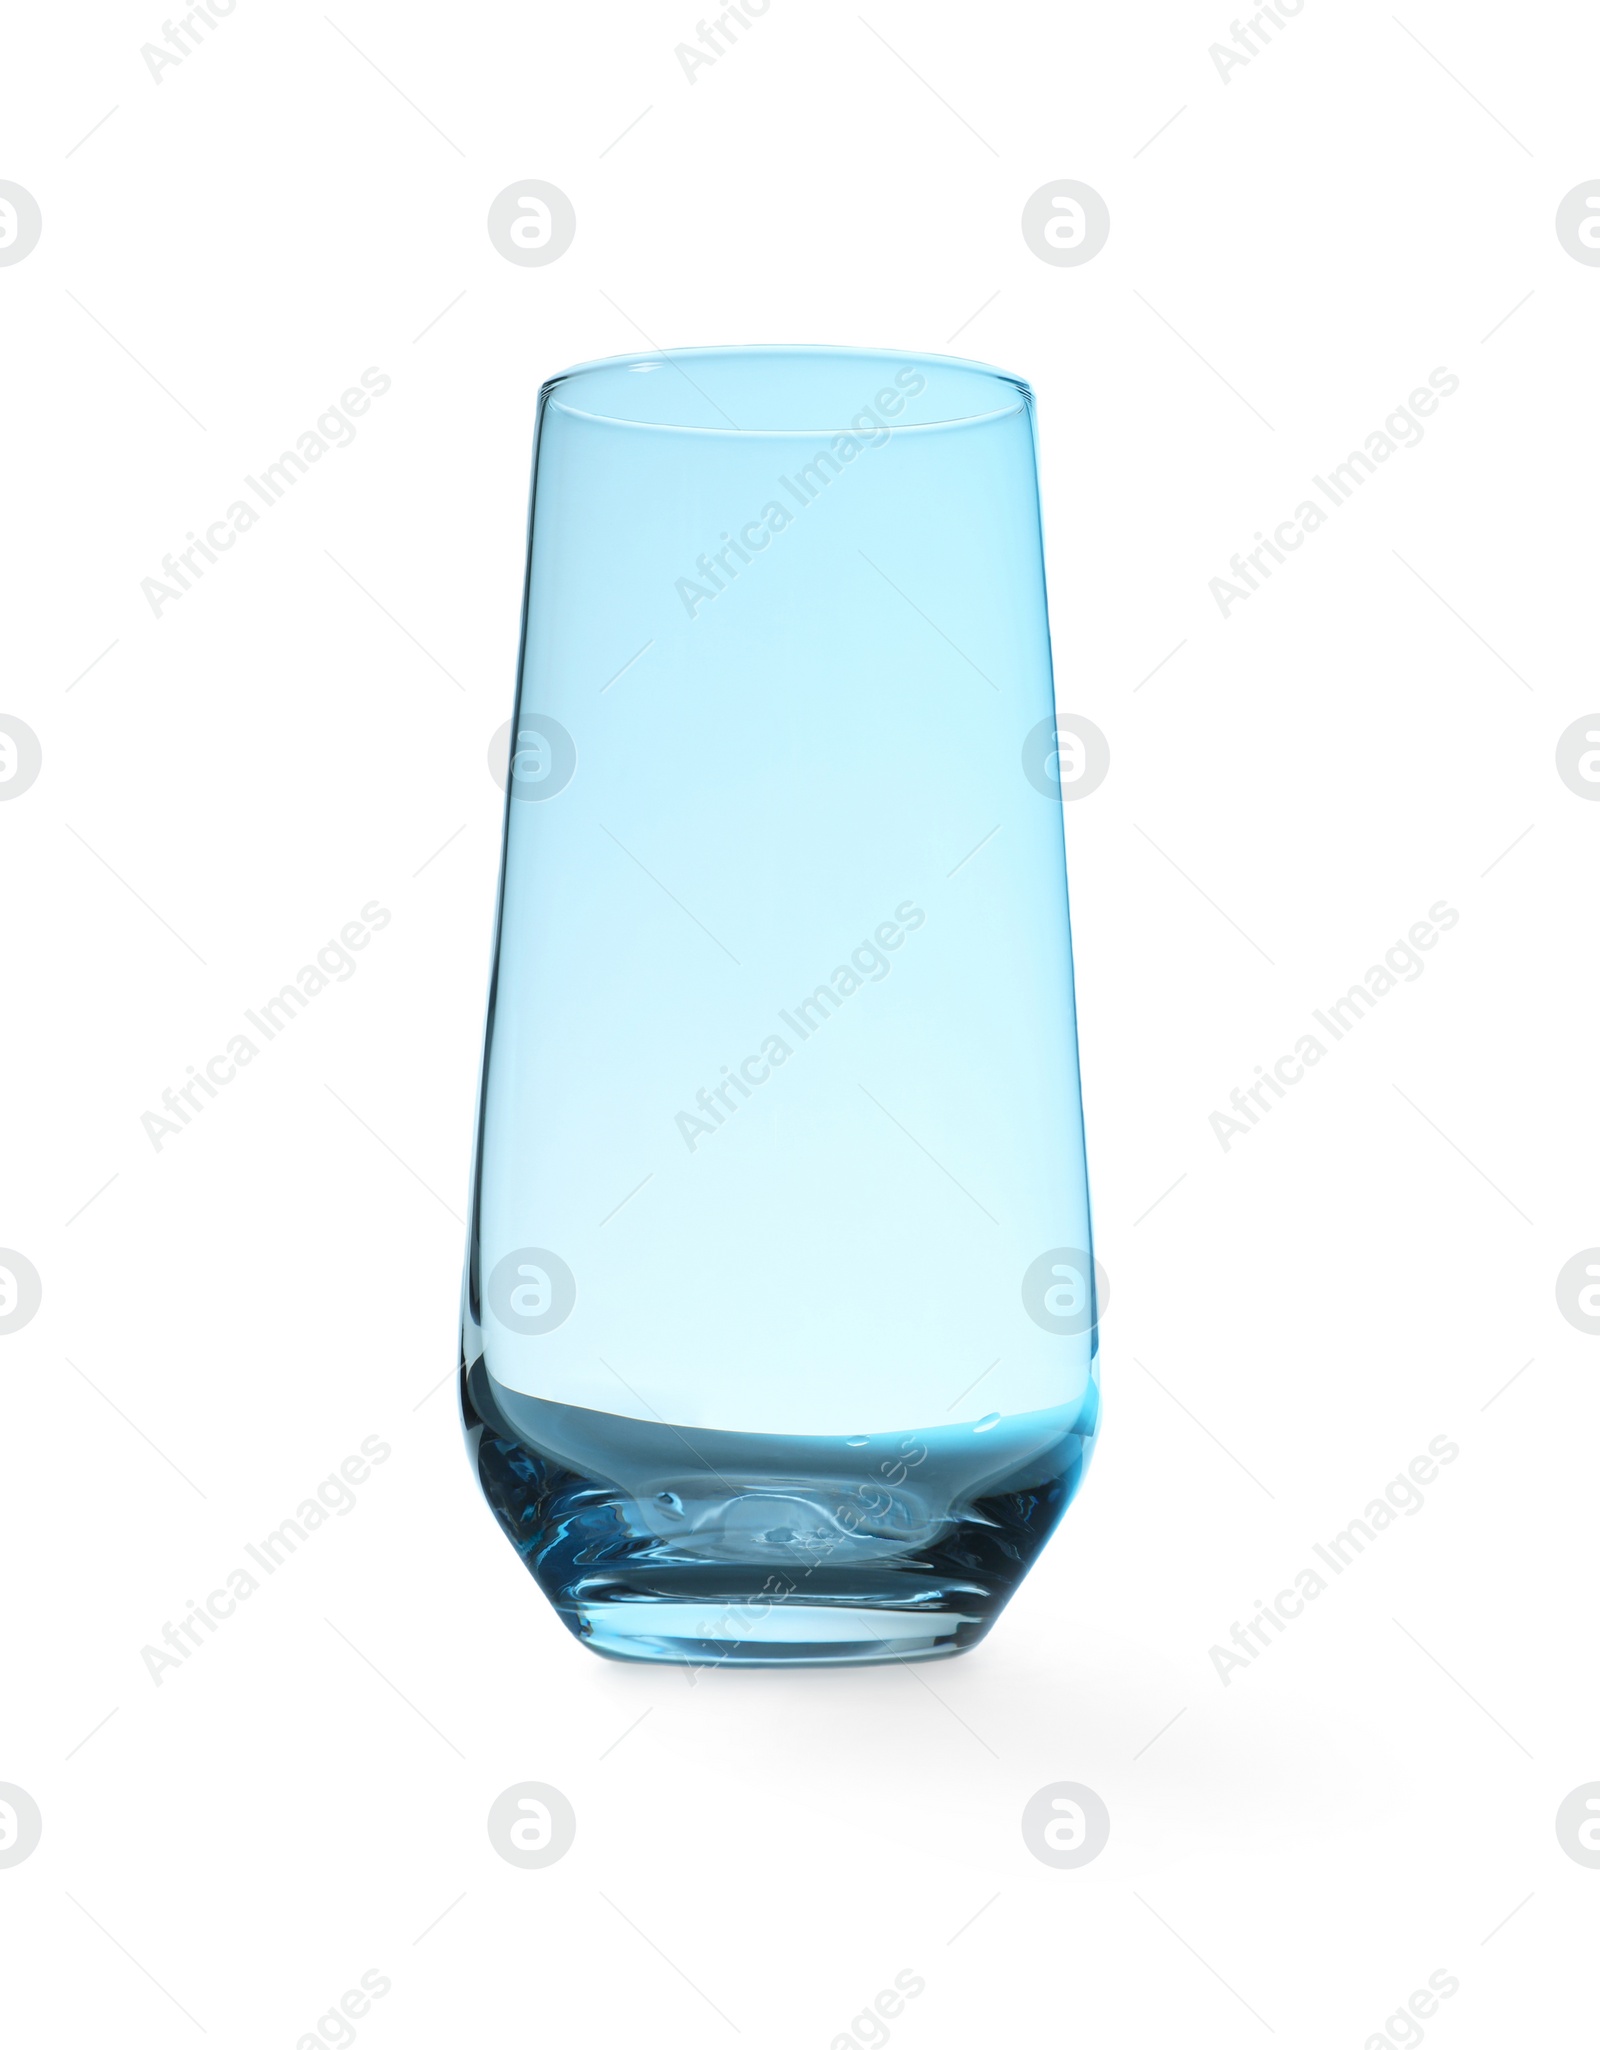 Photo of New empty clear glass on blue background